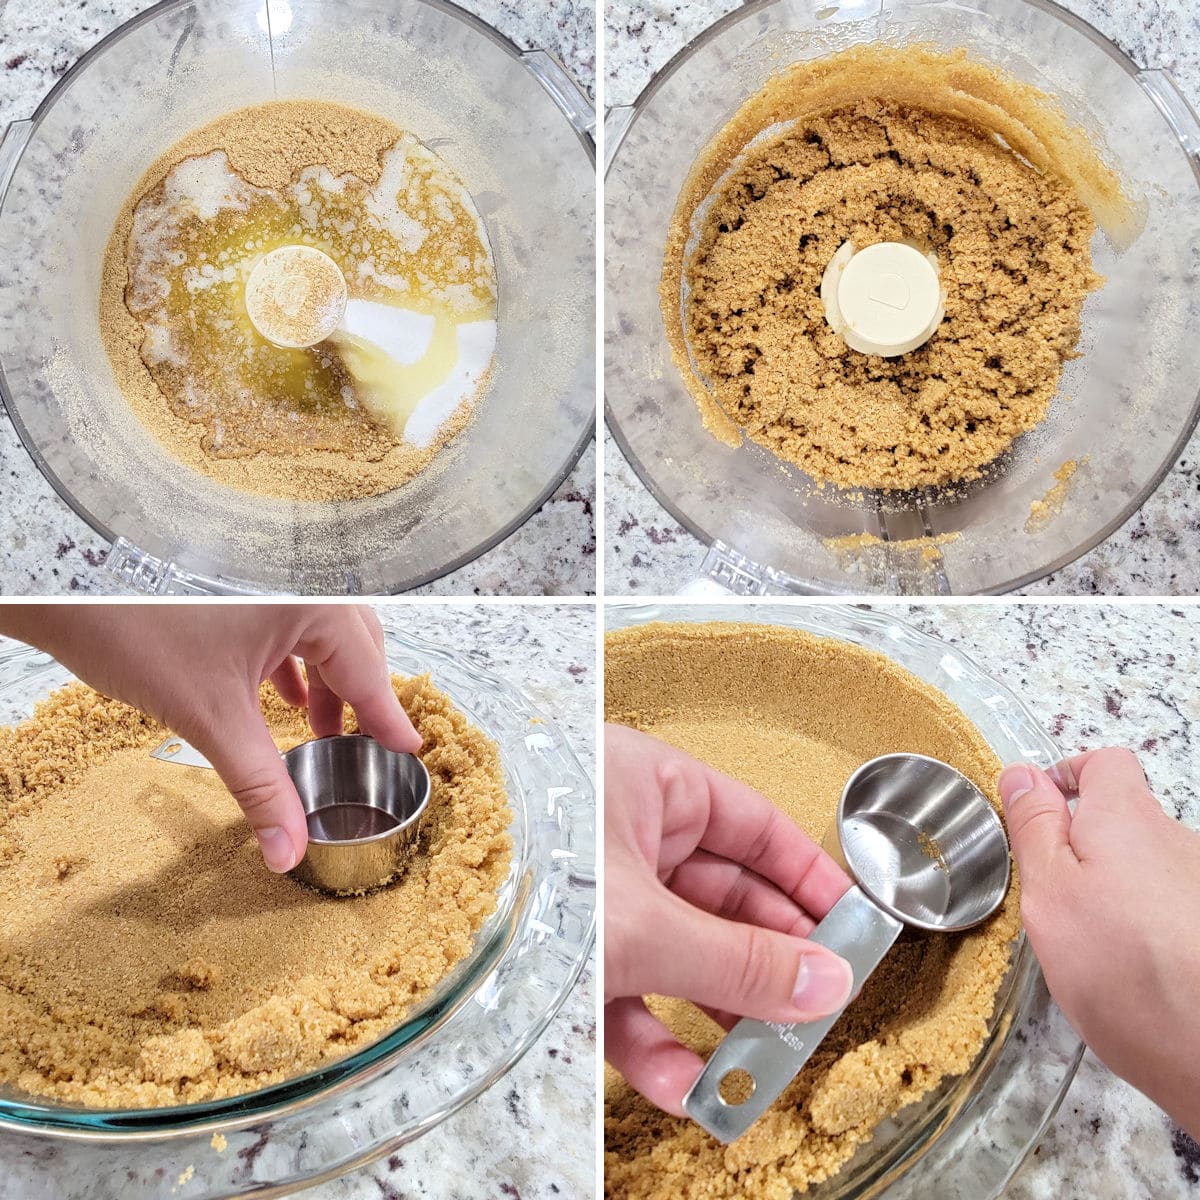 Mixing graham cracker crust in a food processor and pressing crust into a glass pie pan.